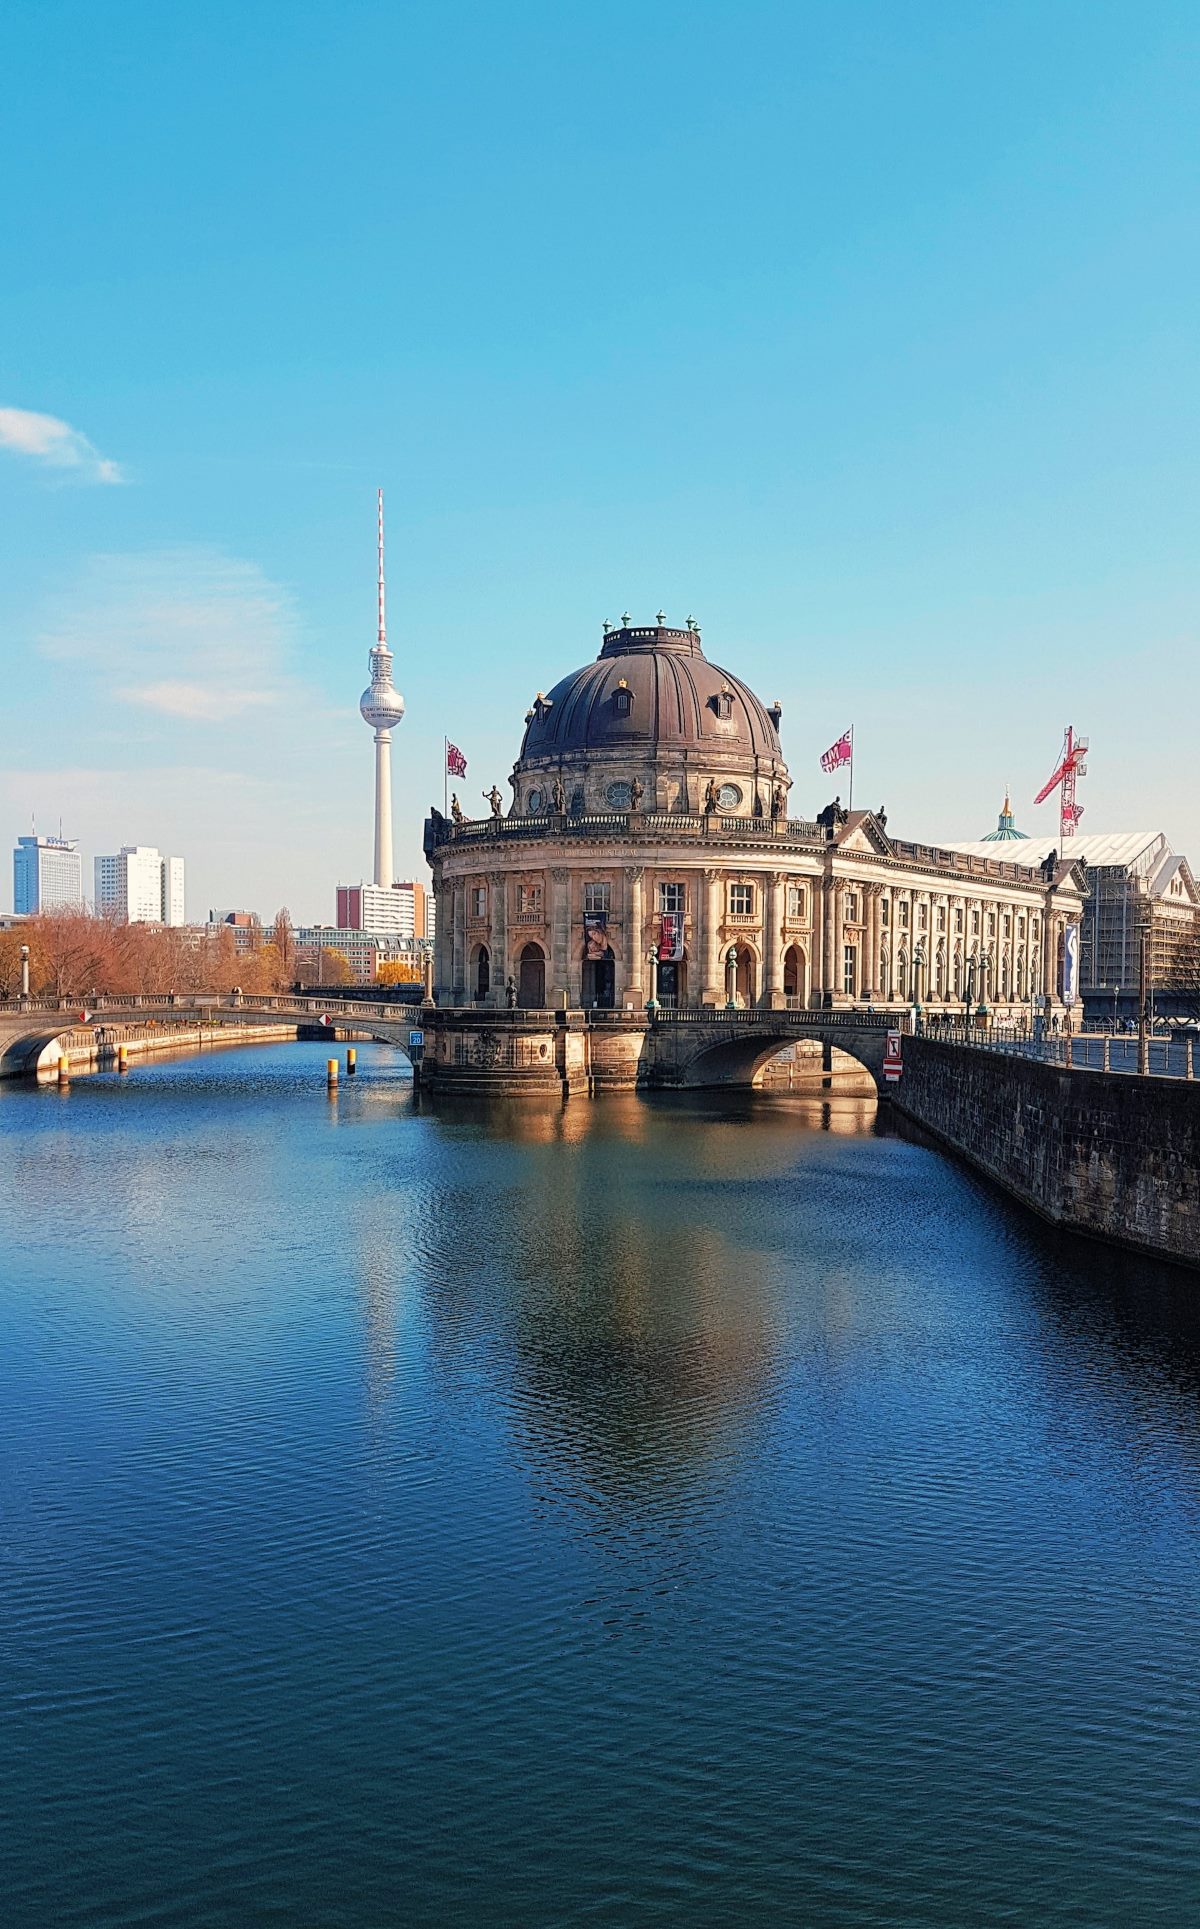 What are some must-see tourist spots in Berlin?